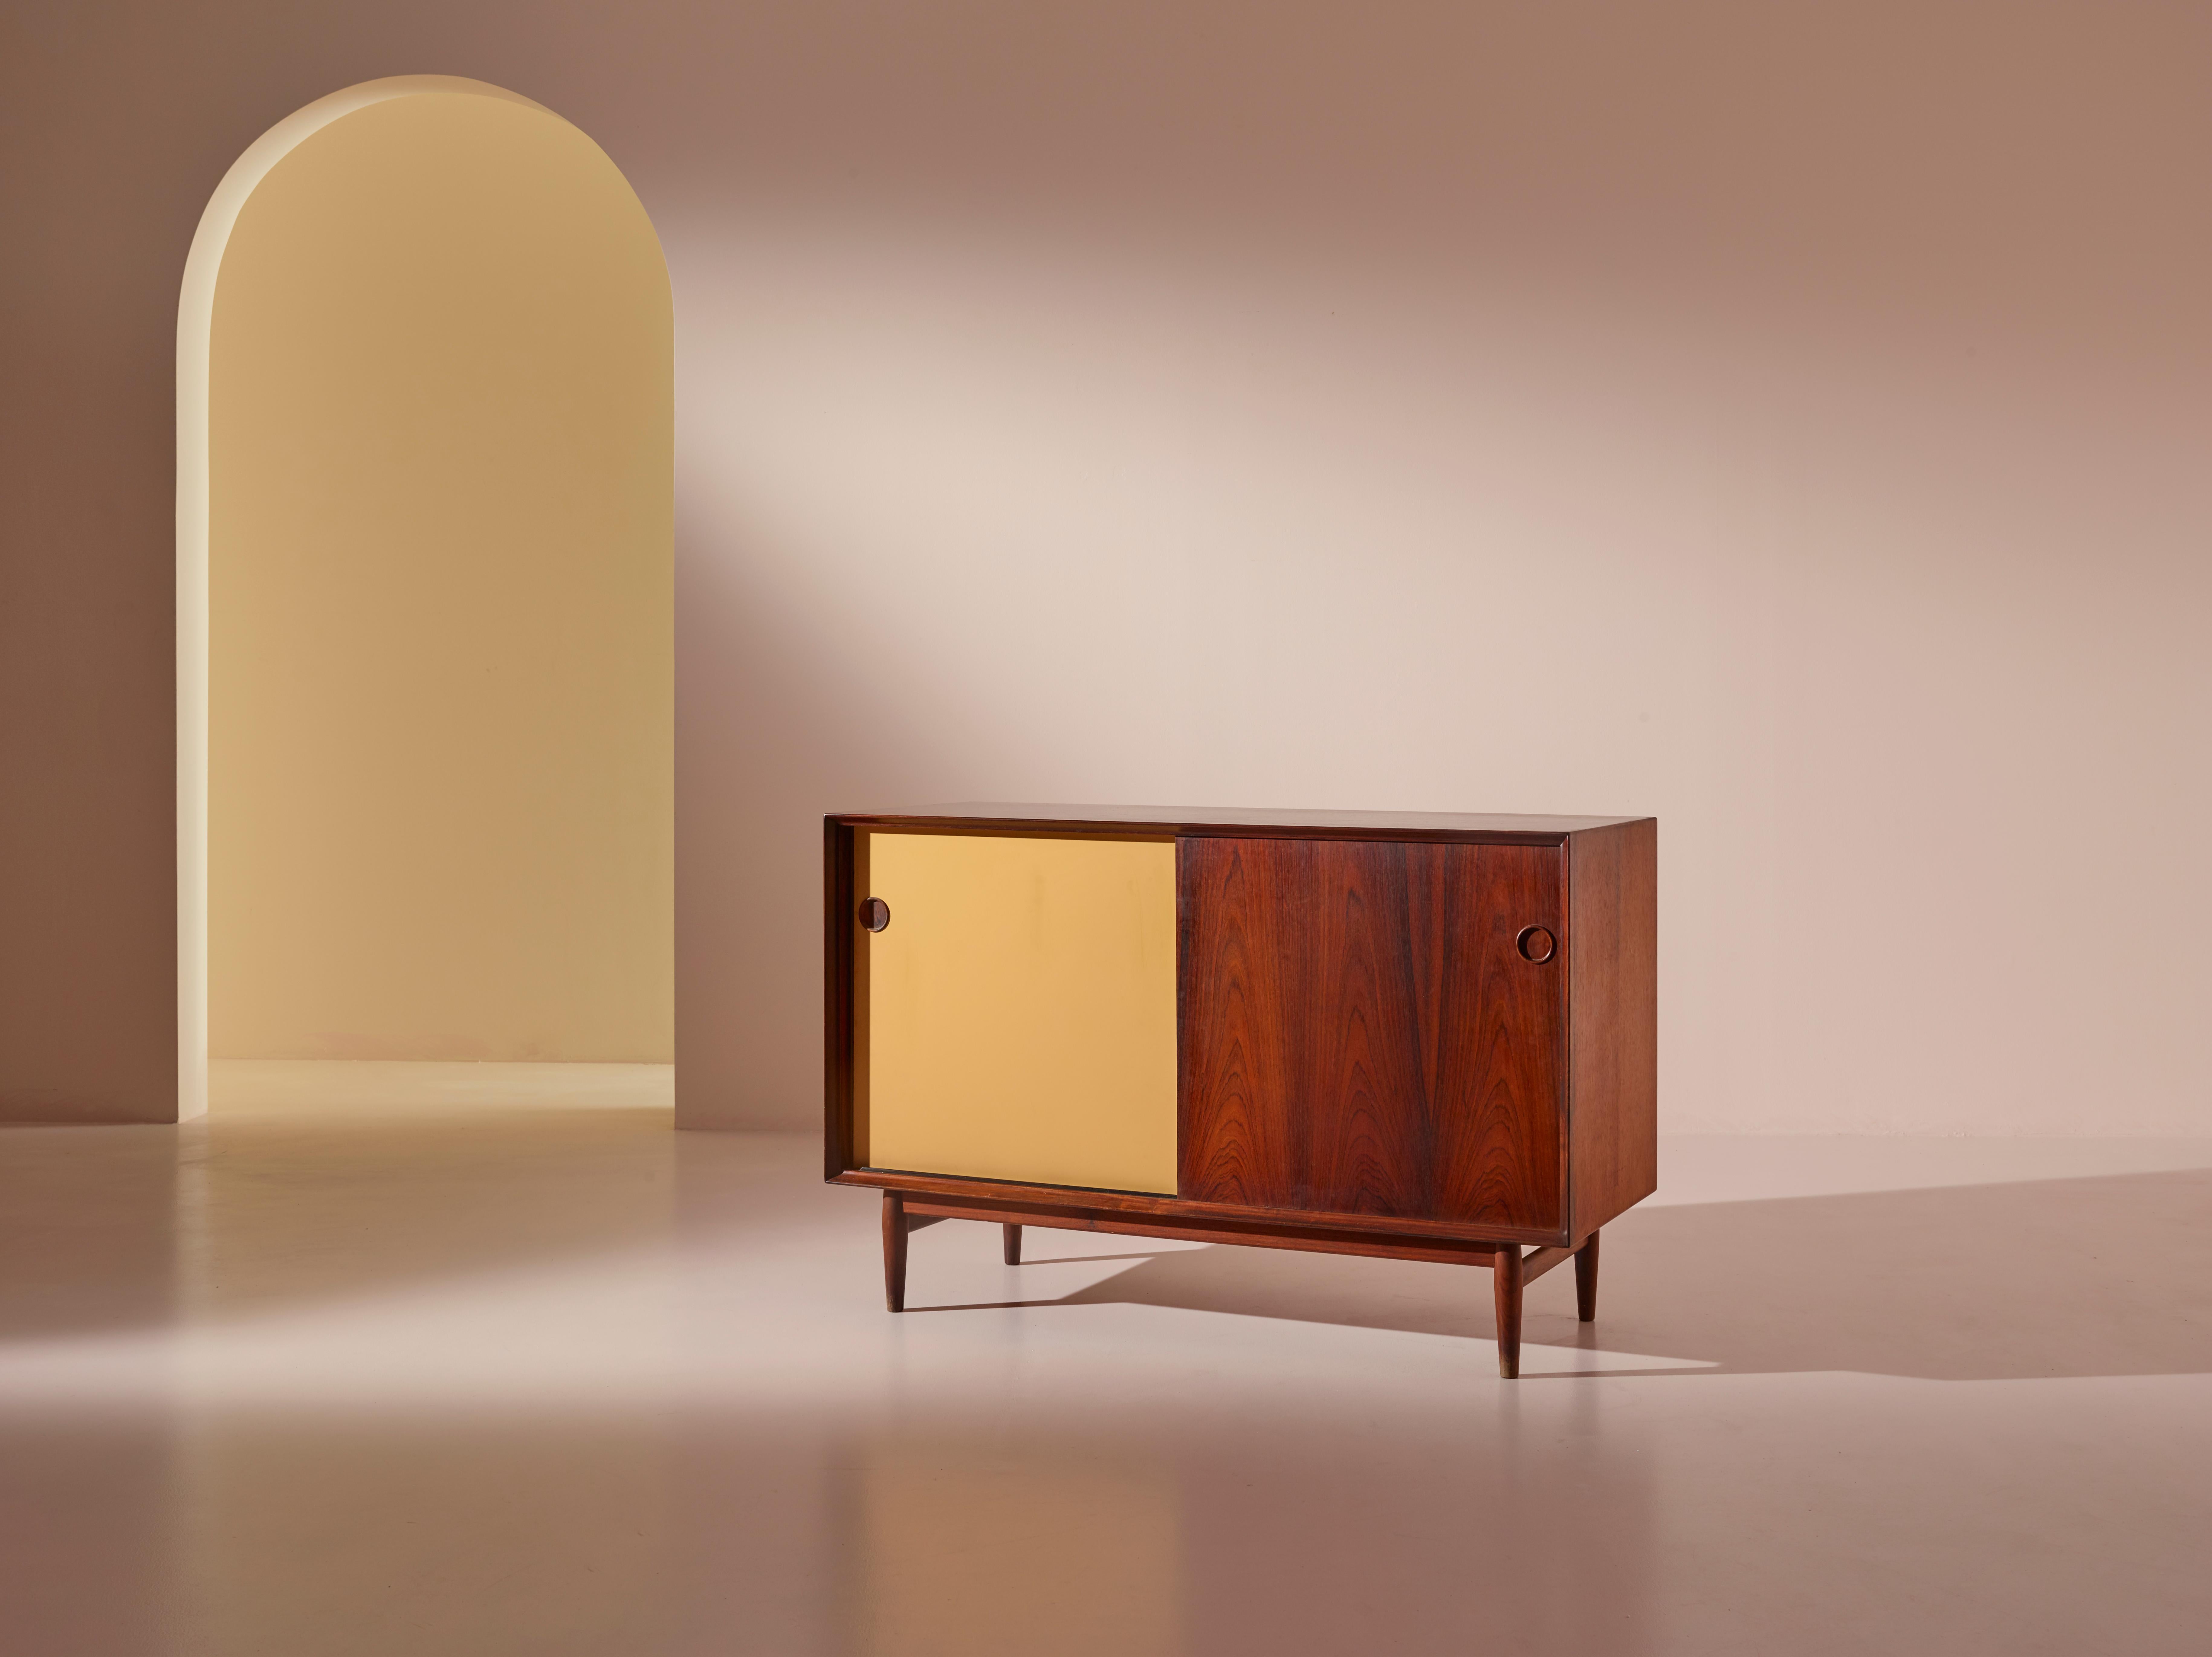 The Arne Vodder-designed sideboard, known as the OS11 and produced in Denmark by Sibast Mobler in the 1950s, is a beautiful and iconic piece of mid-century modern furniture. This sideboard is constructed from solid wood and features a rosewood